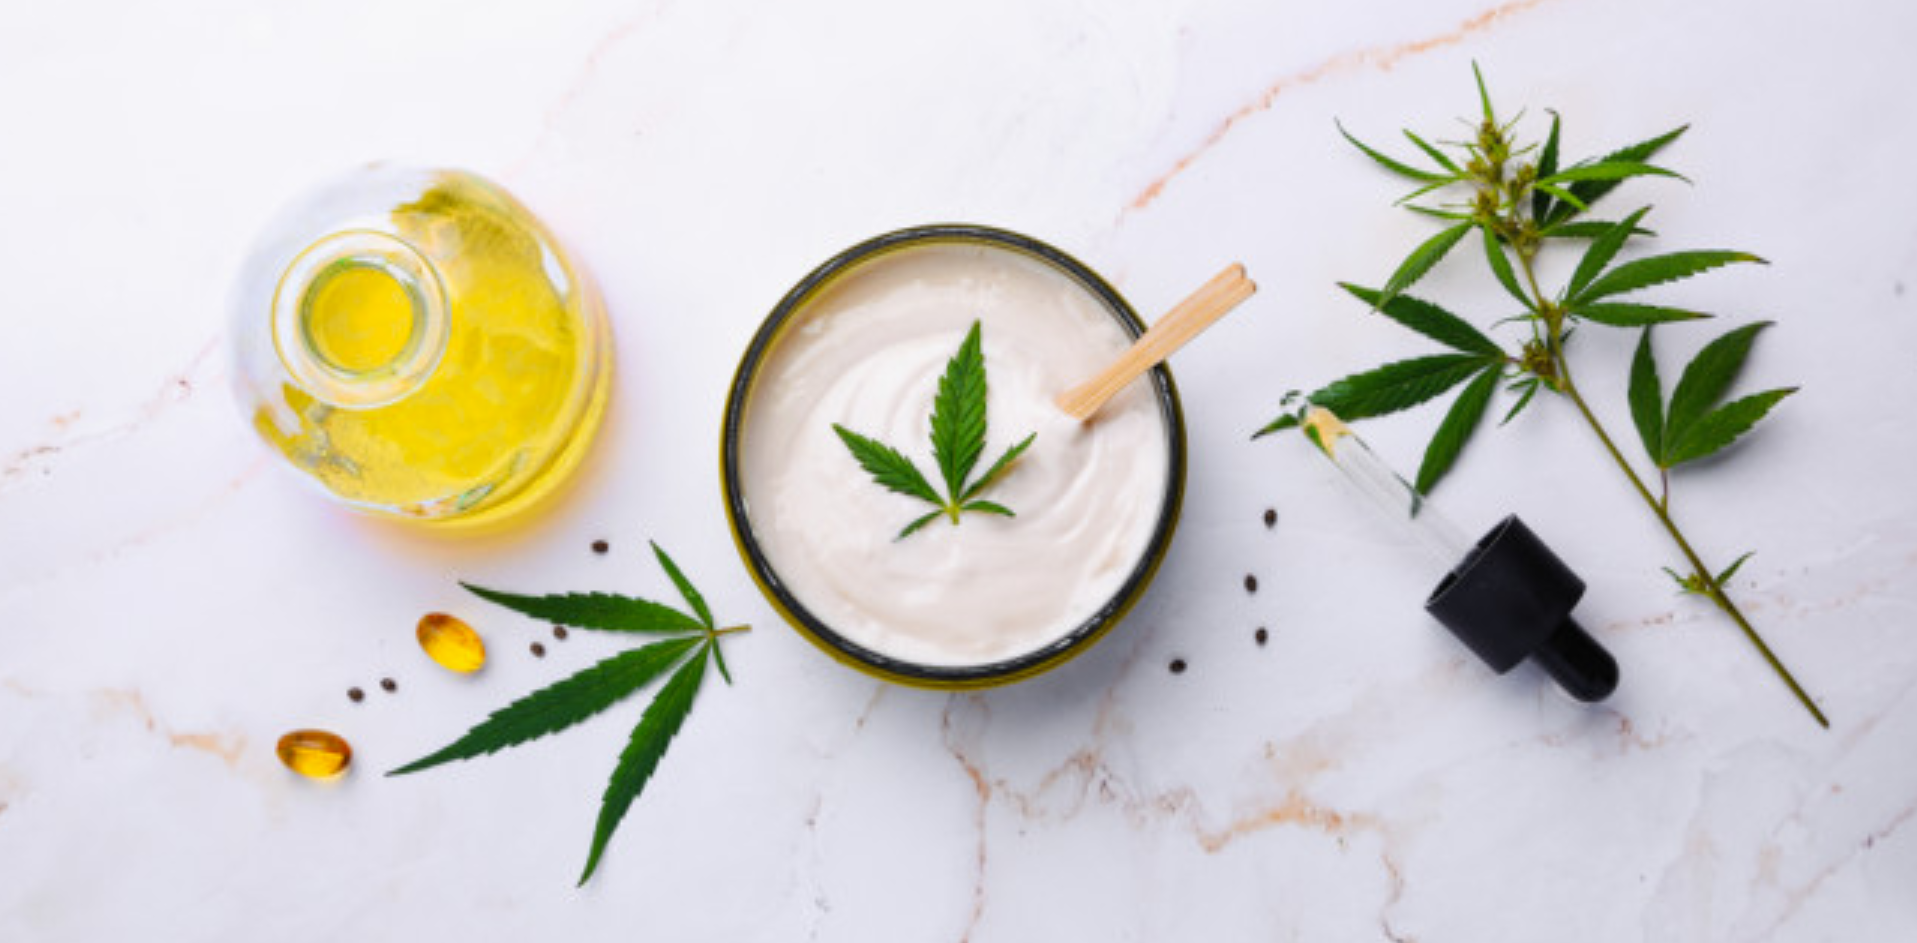 Yes, CBD Creams Relieve Pain. But Science is Still Learning About the Benefits and Risks (Discover, 2020)